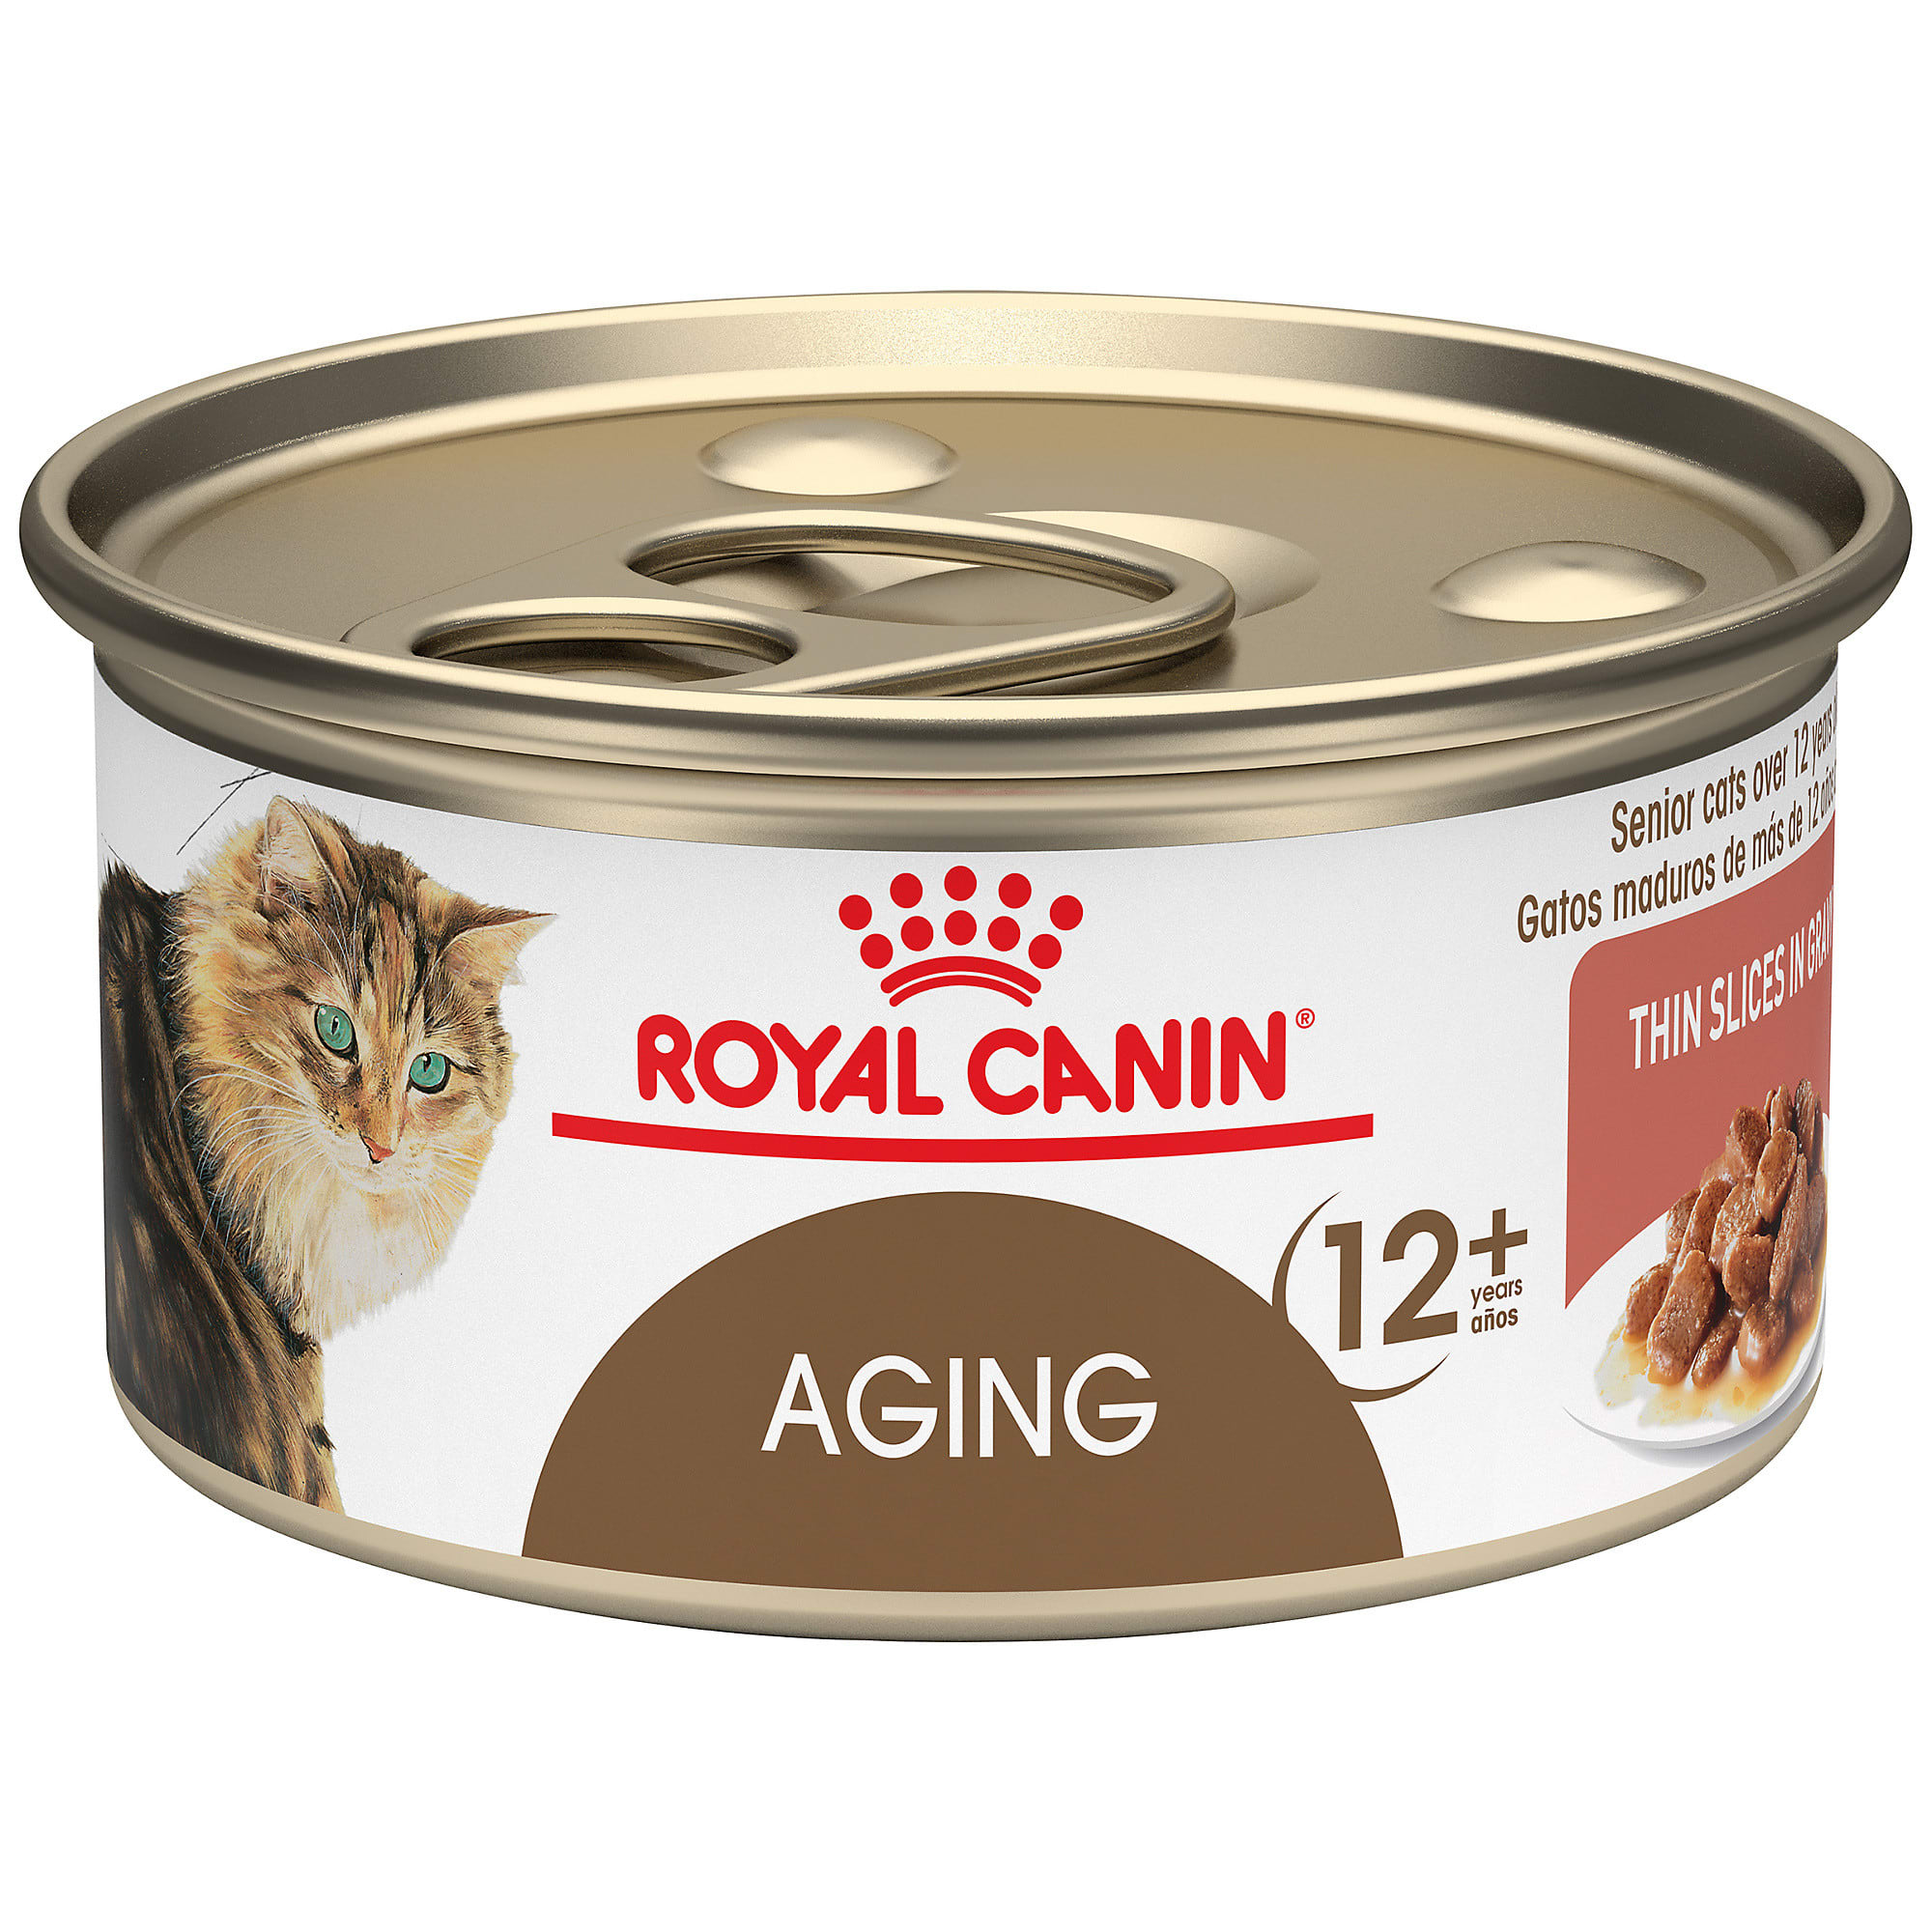 Royal Canin Aging 12+ Thin Slices in 